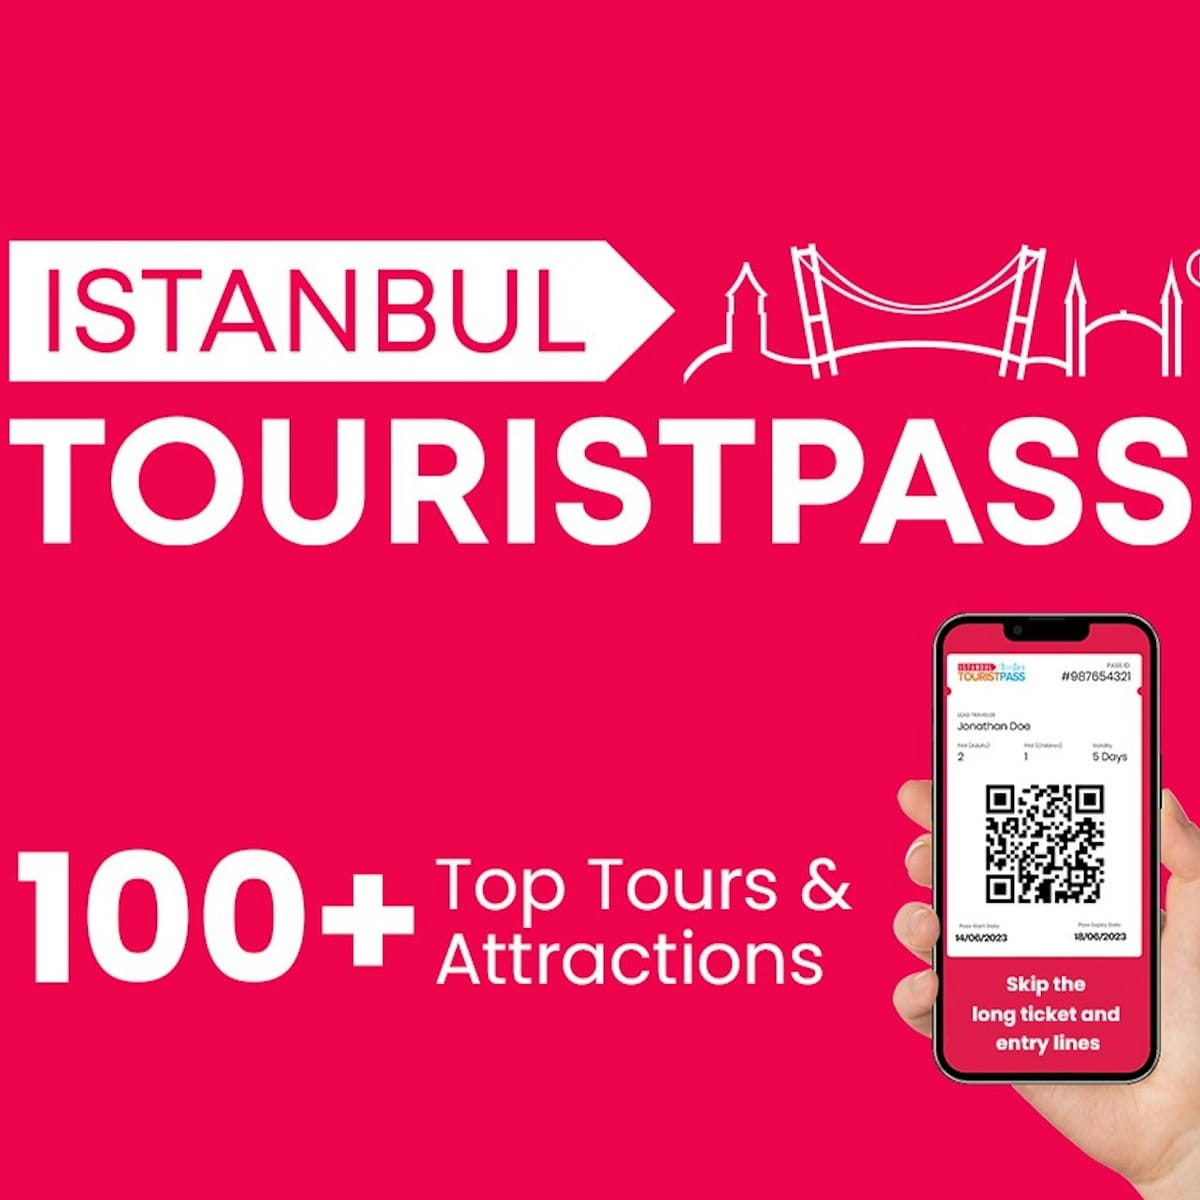 istanbul-tourist-pass-100-top-attractions_1